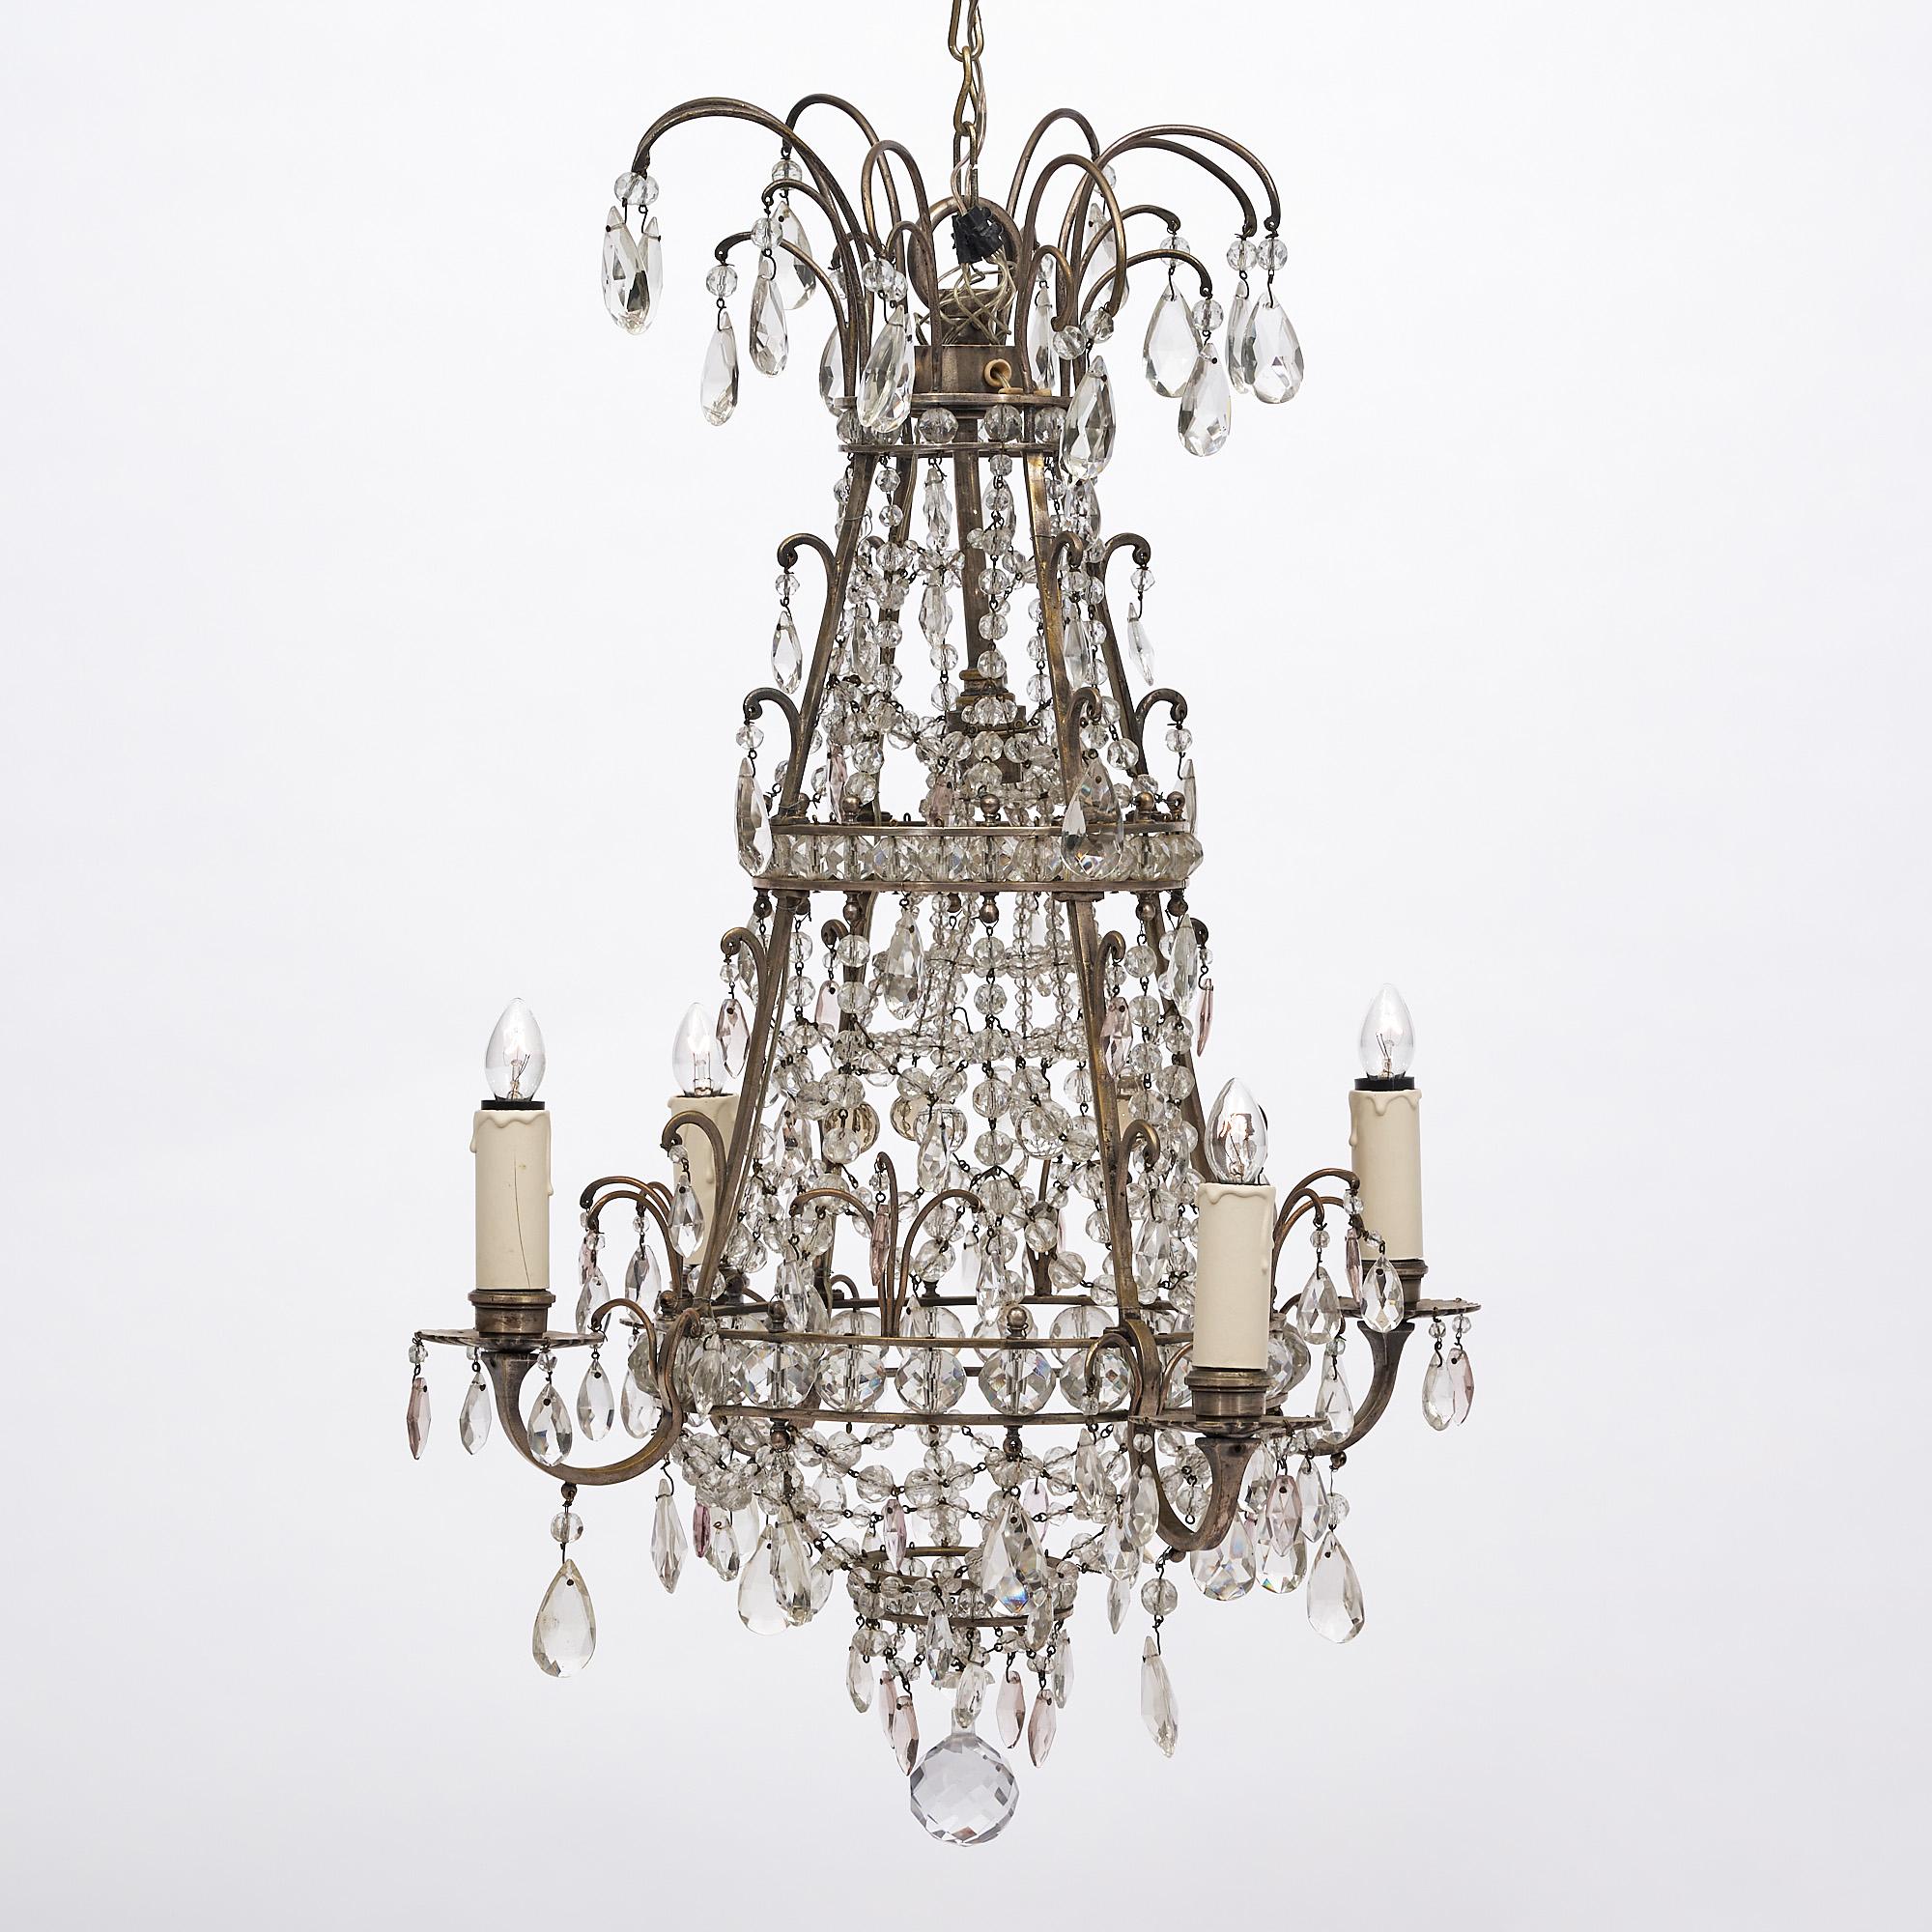 Chandelier with four branches from France. This fixture features a silver plated structure with multiple cut crystals and pendants interlaced with rows of cut beads. It has been newly wired to fit US standards.